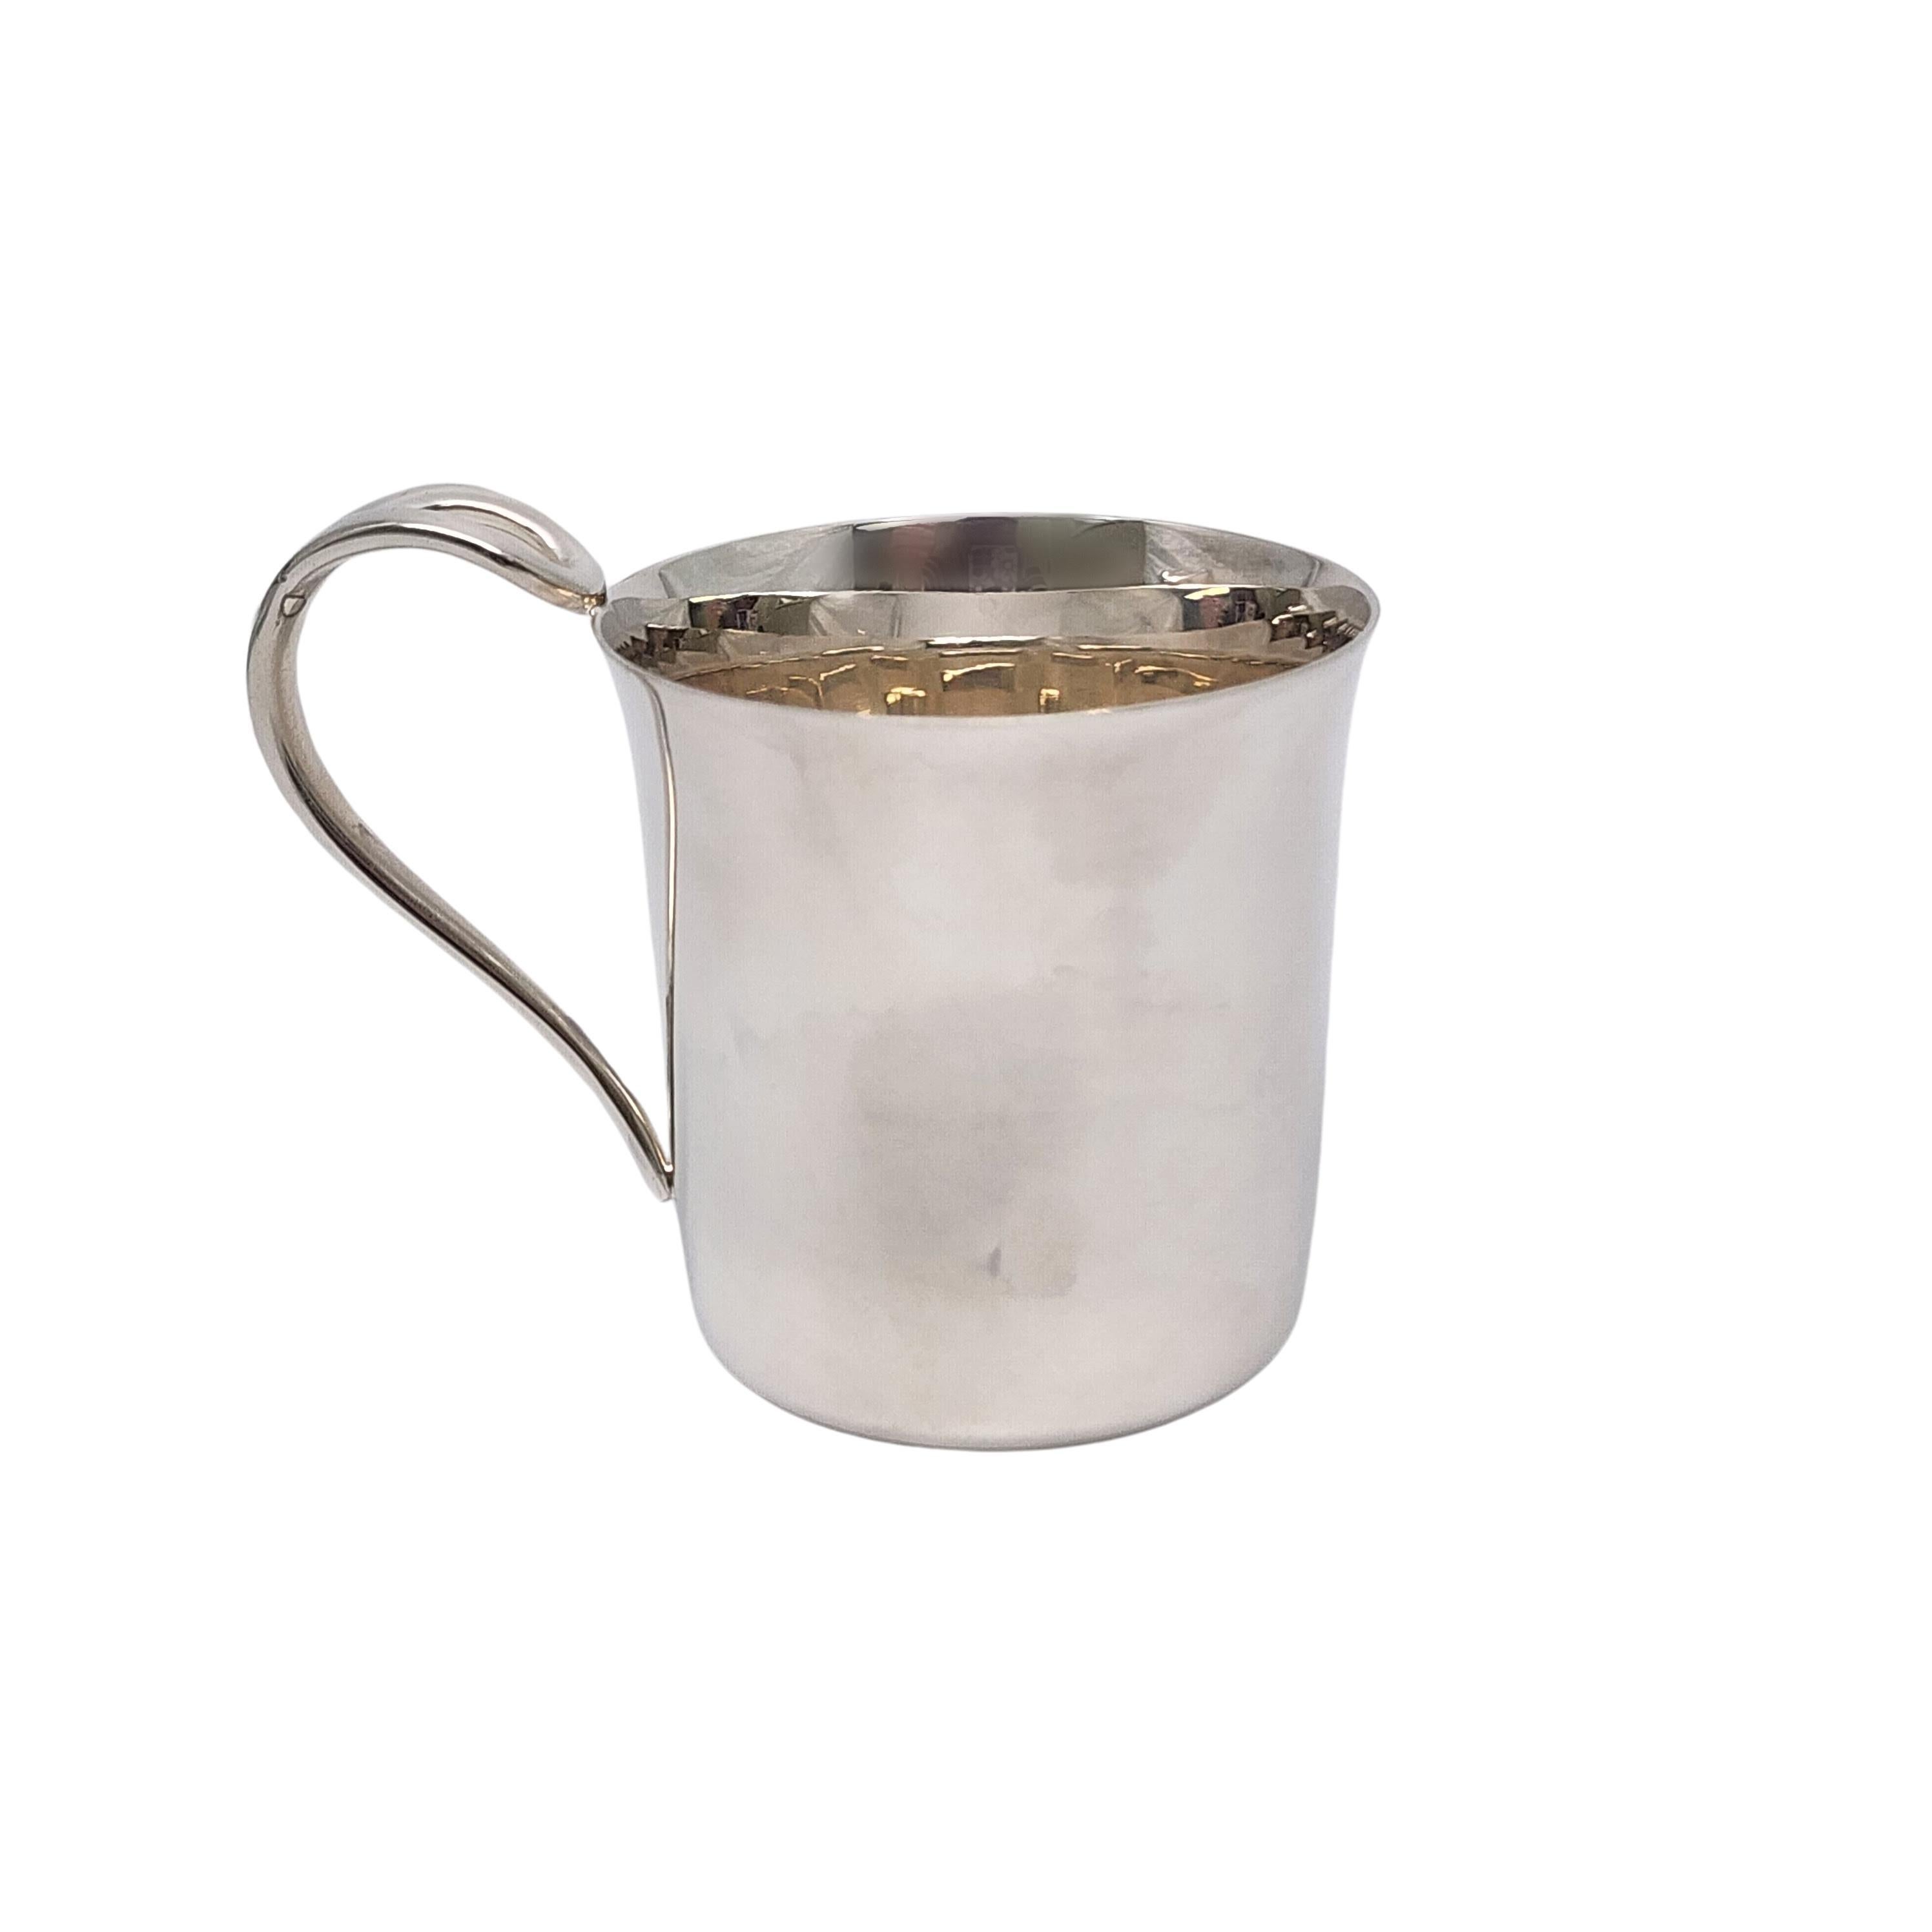 Tiffany & Co sterling silver baby cup in the Padova pattern by Elsa Peretti with pouch.

No monogram

A simple and classic child or baby cup with a curved open loop handle and highly polished finish. Includes Tiffany & Co pouch.

Measures approx 2